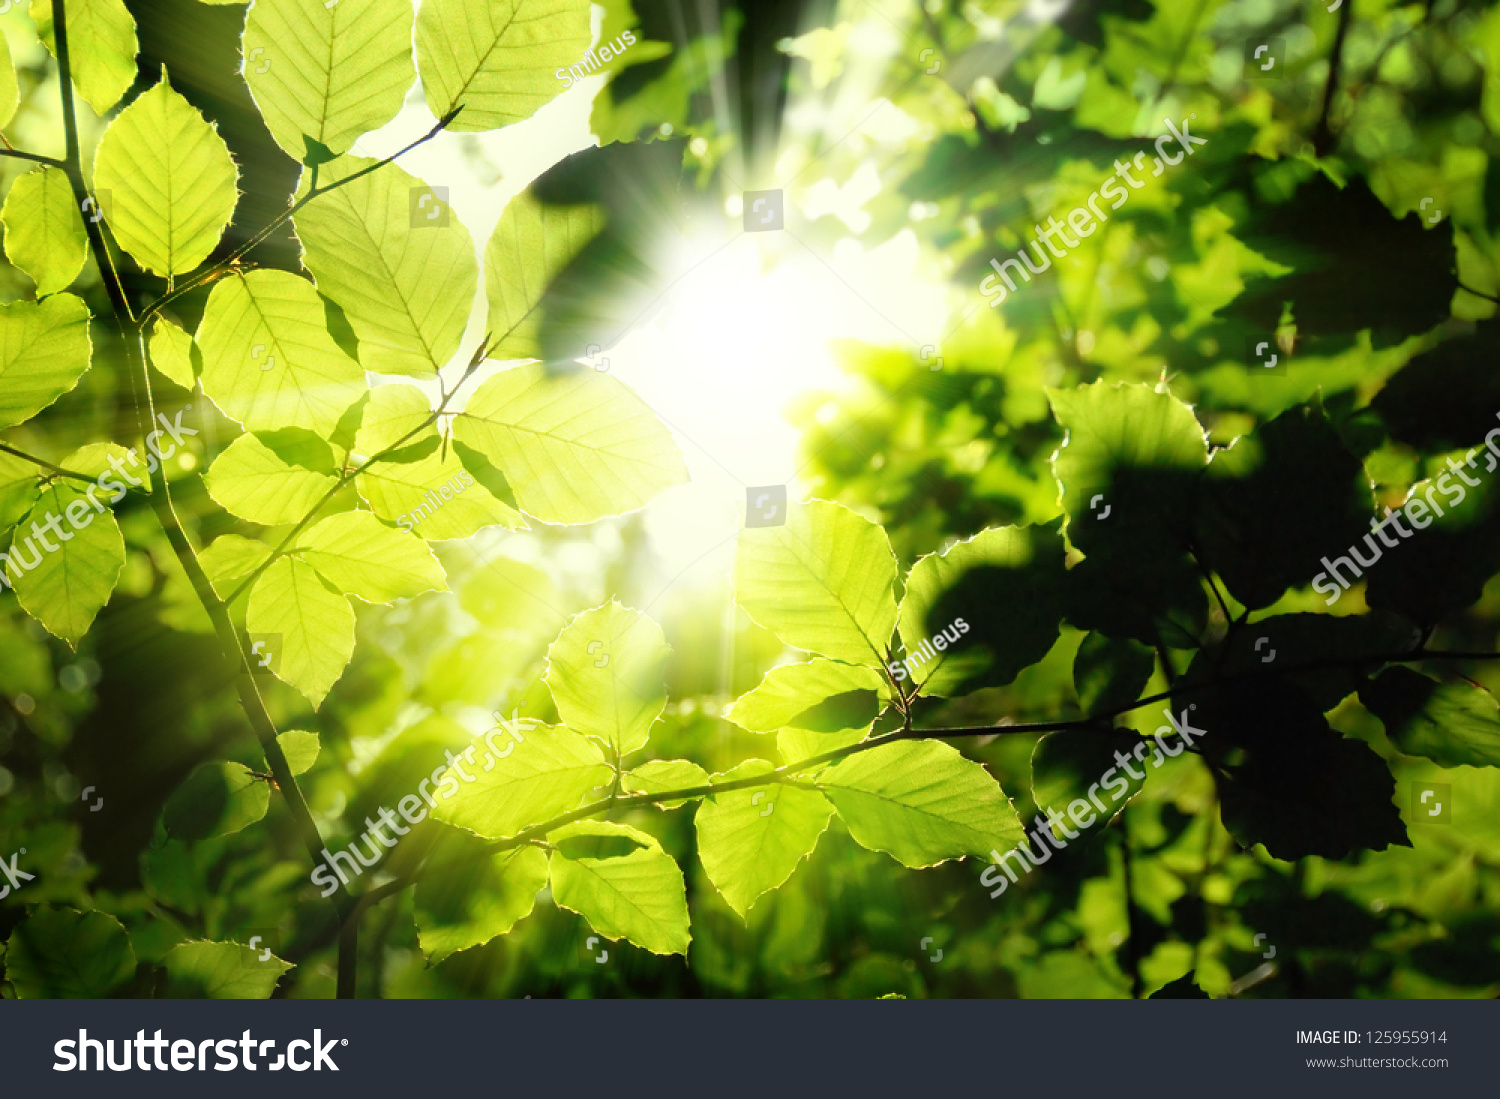 Fresh green leaves in a forest framing the sun in the middle and forming rays of light #125955914